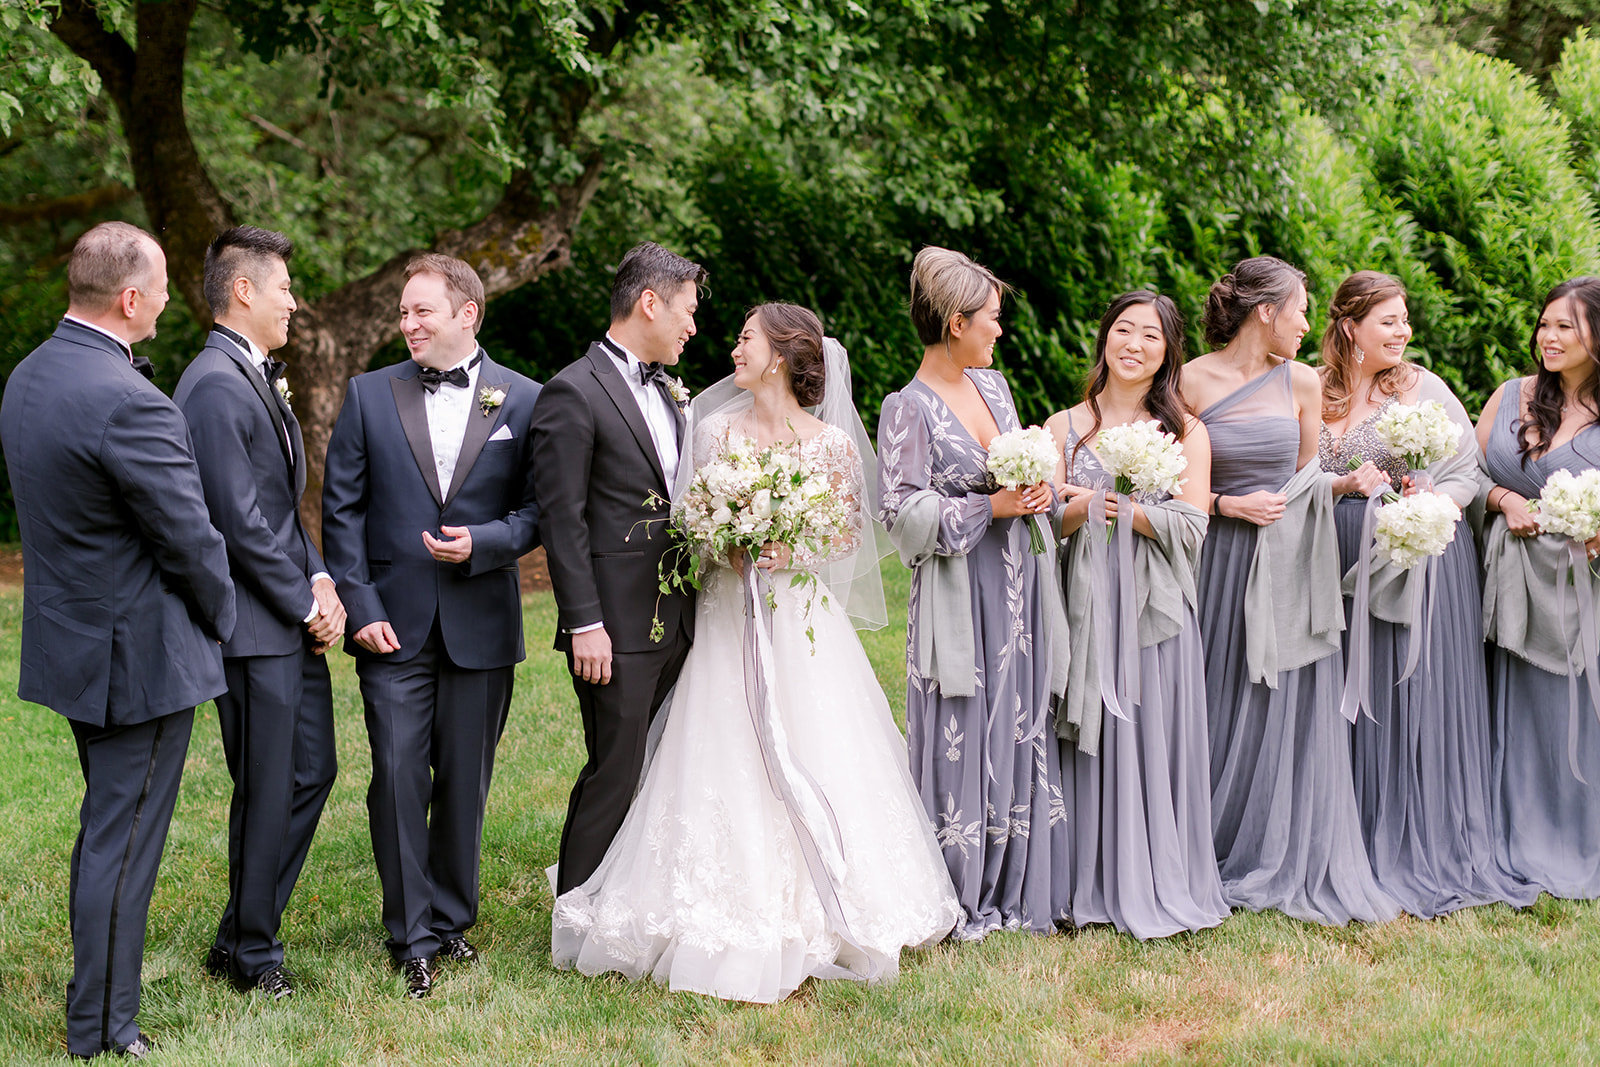 Bridesmaids and groomsmen smiling and happy